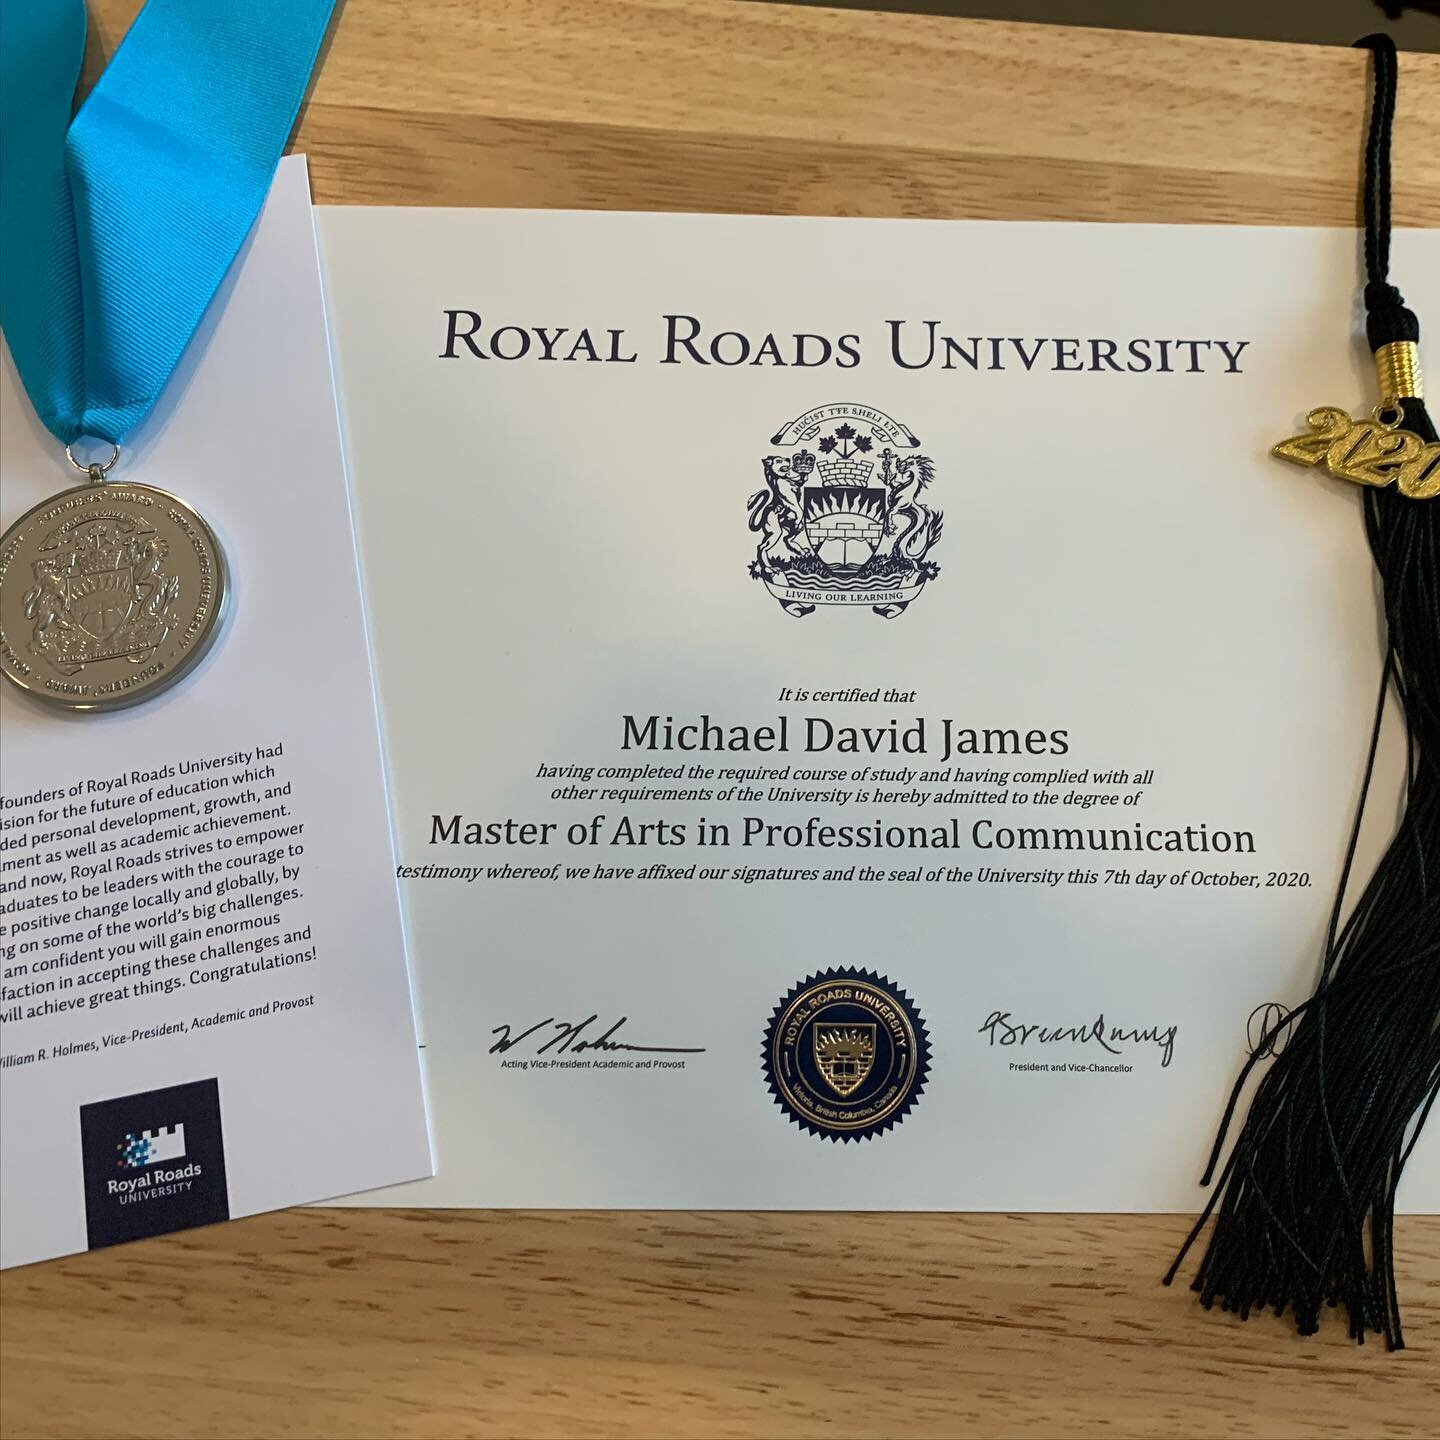 Well...after two amazing but tough years, we&rsquo;re done! What an amazing experience with some amazing people! Congrats to all of my cohort! #yeg #theyegmakers #thesis #graduation2020 #royalroadsuniversity @royalroadsu